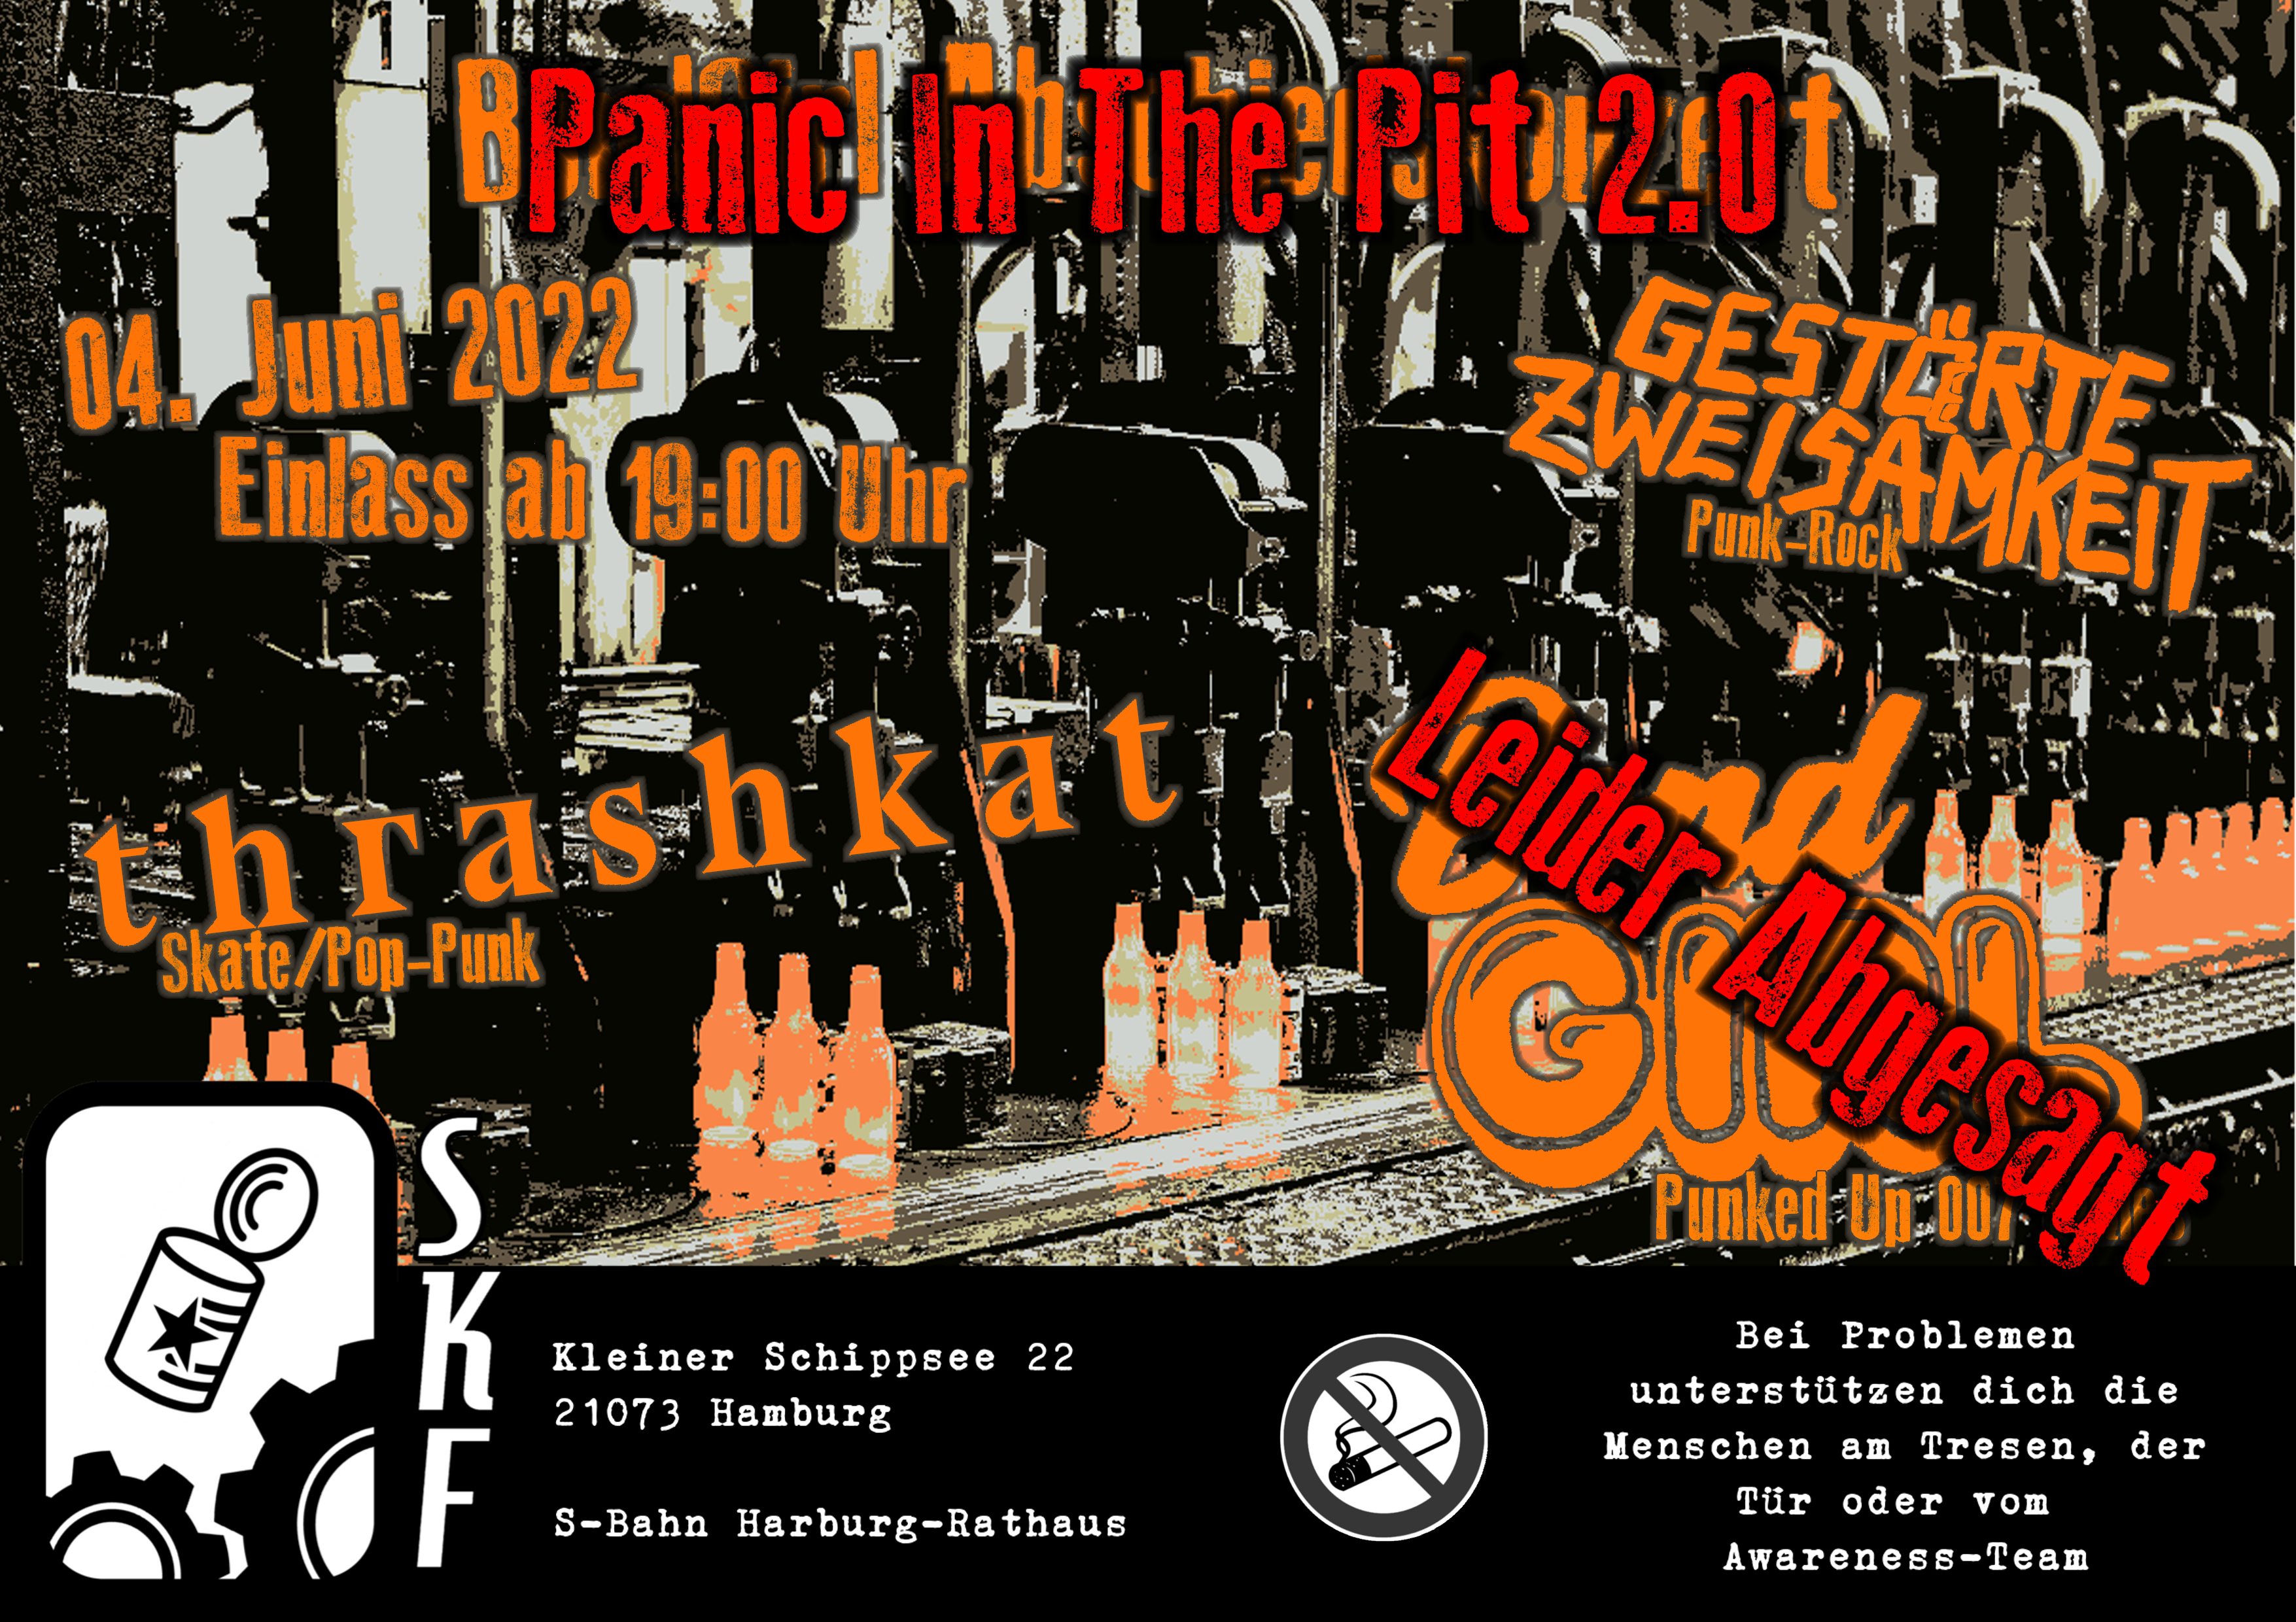 04.06.2022 – Panic In The Pit 2.0